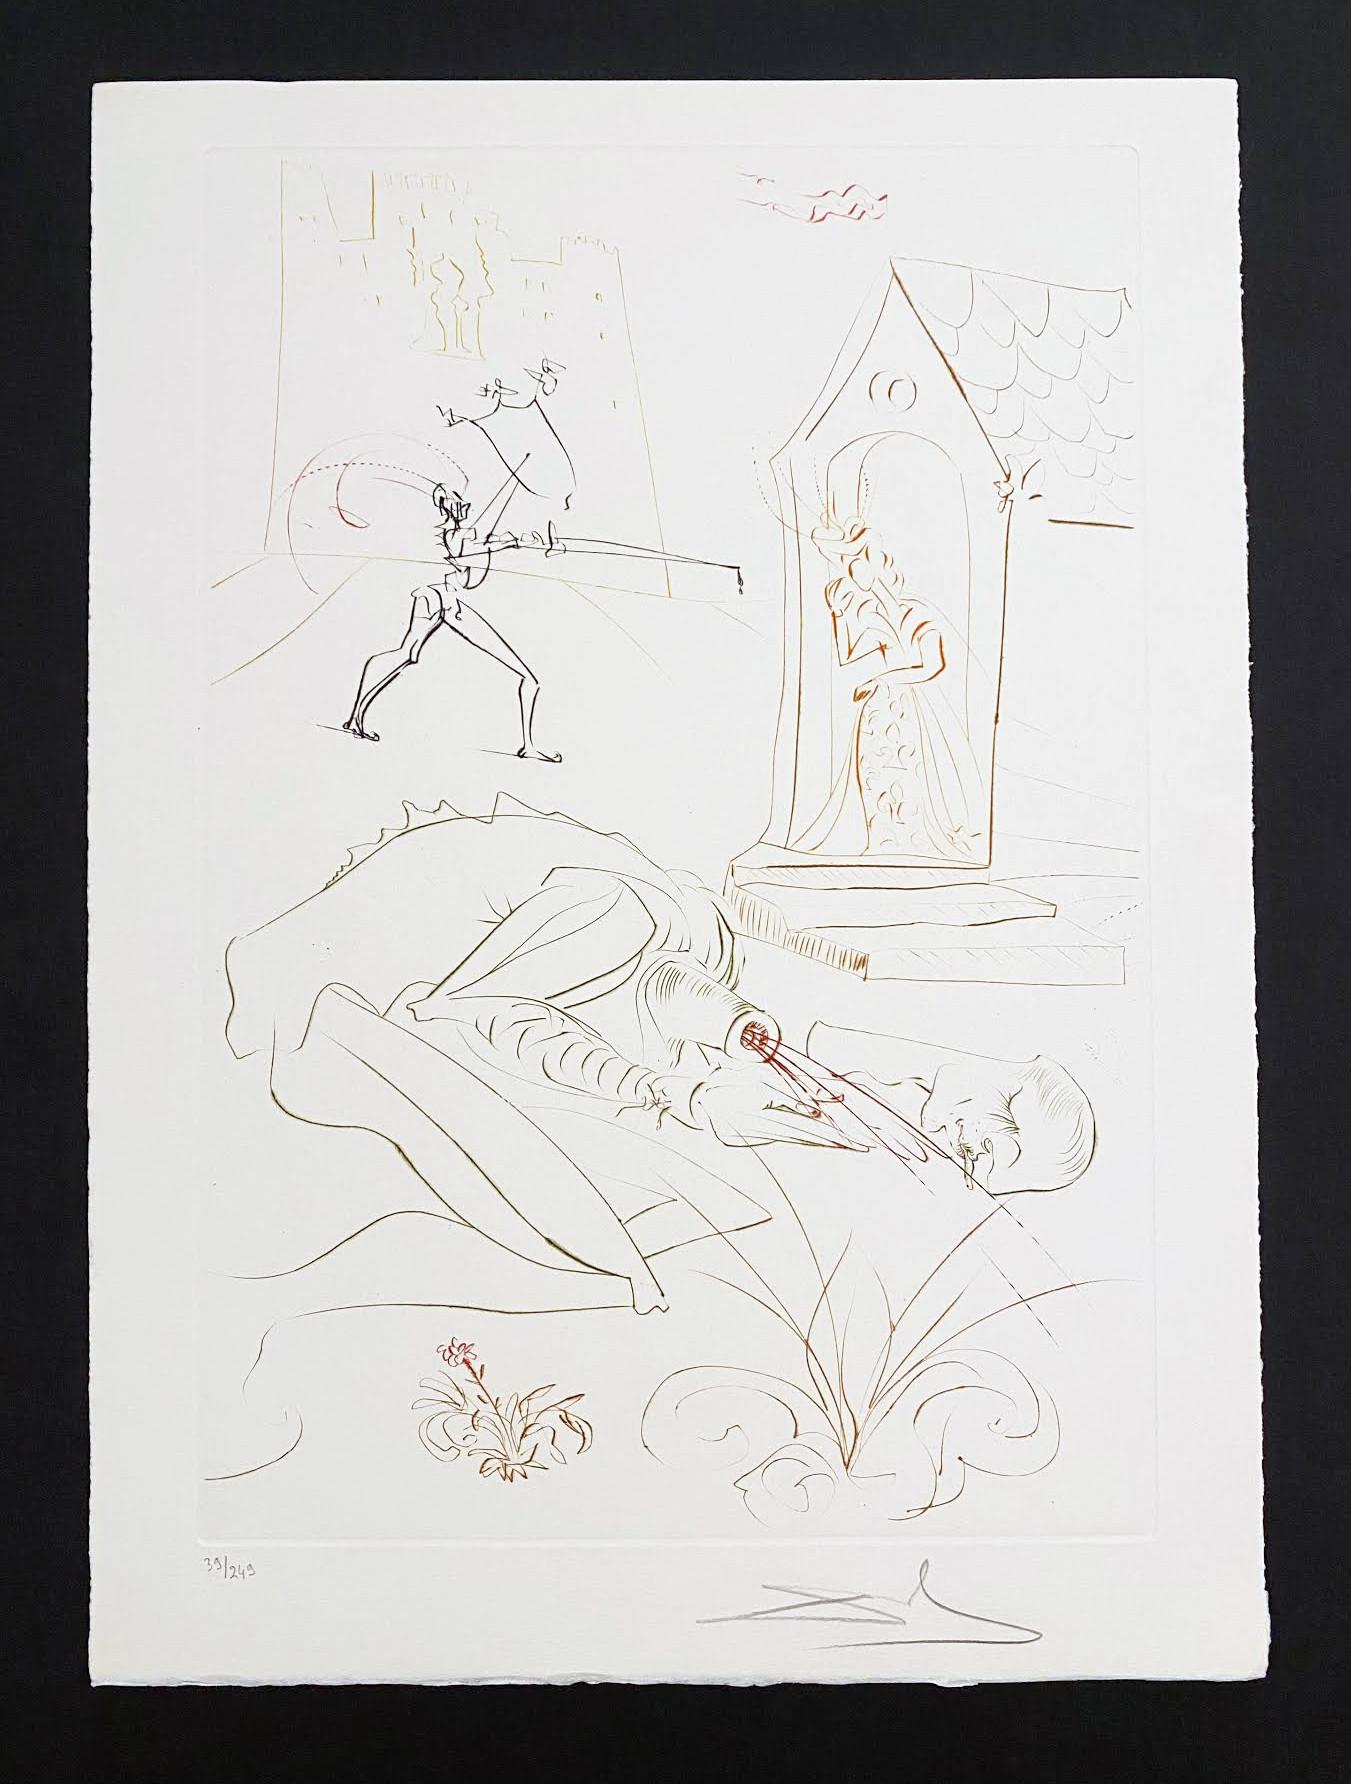 Artist: Salvador Dali
Title: Fight Before la Dame de Malehout
Portfolio: The Quest for the Grail
Medium: Etching in color on Arches paper
Year: 1975
Edition: 39/249
Frame Size: 27